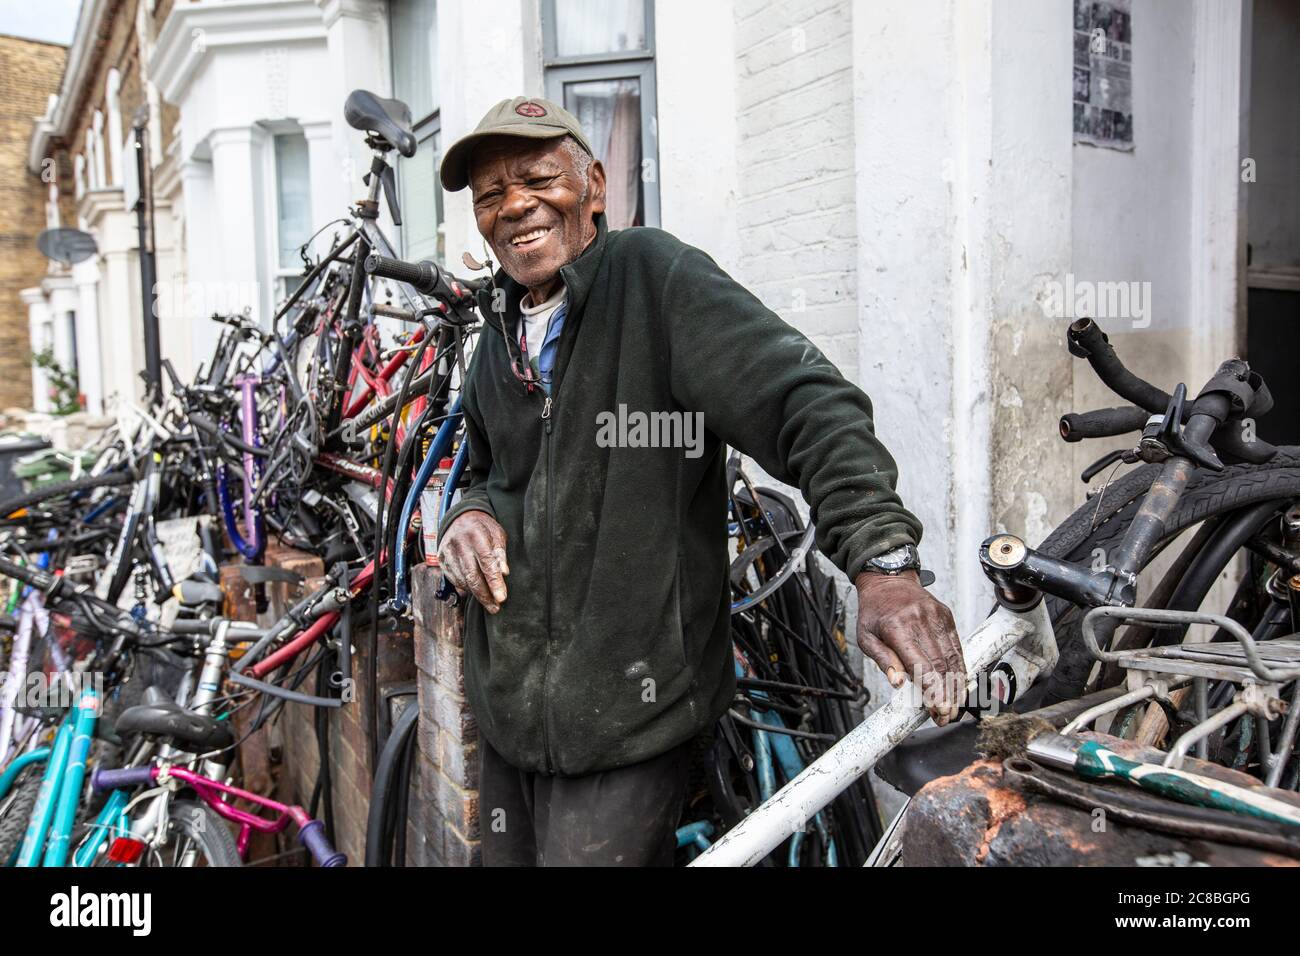 Clovis Salmon, known as 'Sam The Wheels', first generation of migrants from West Indies to settle in UK, London in November 1954, living in Brixton. Stock Photo